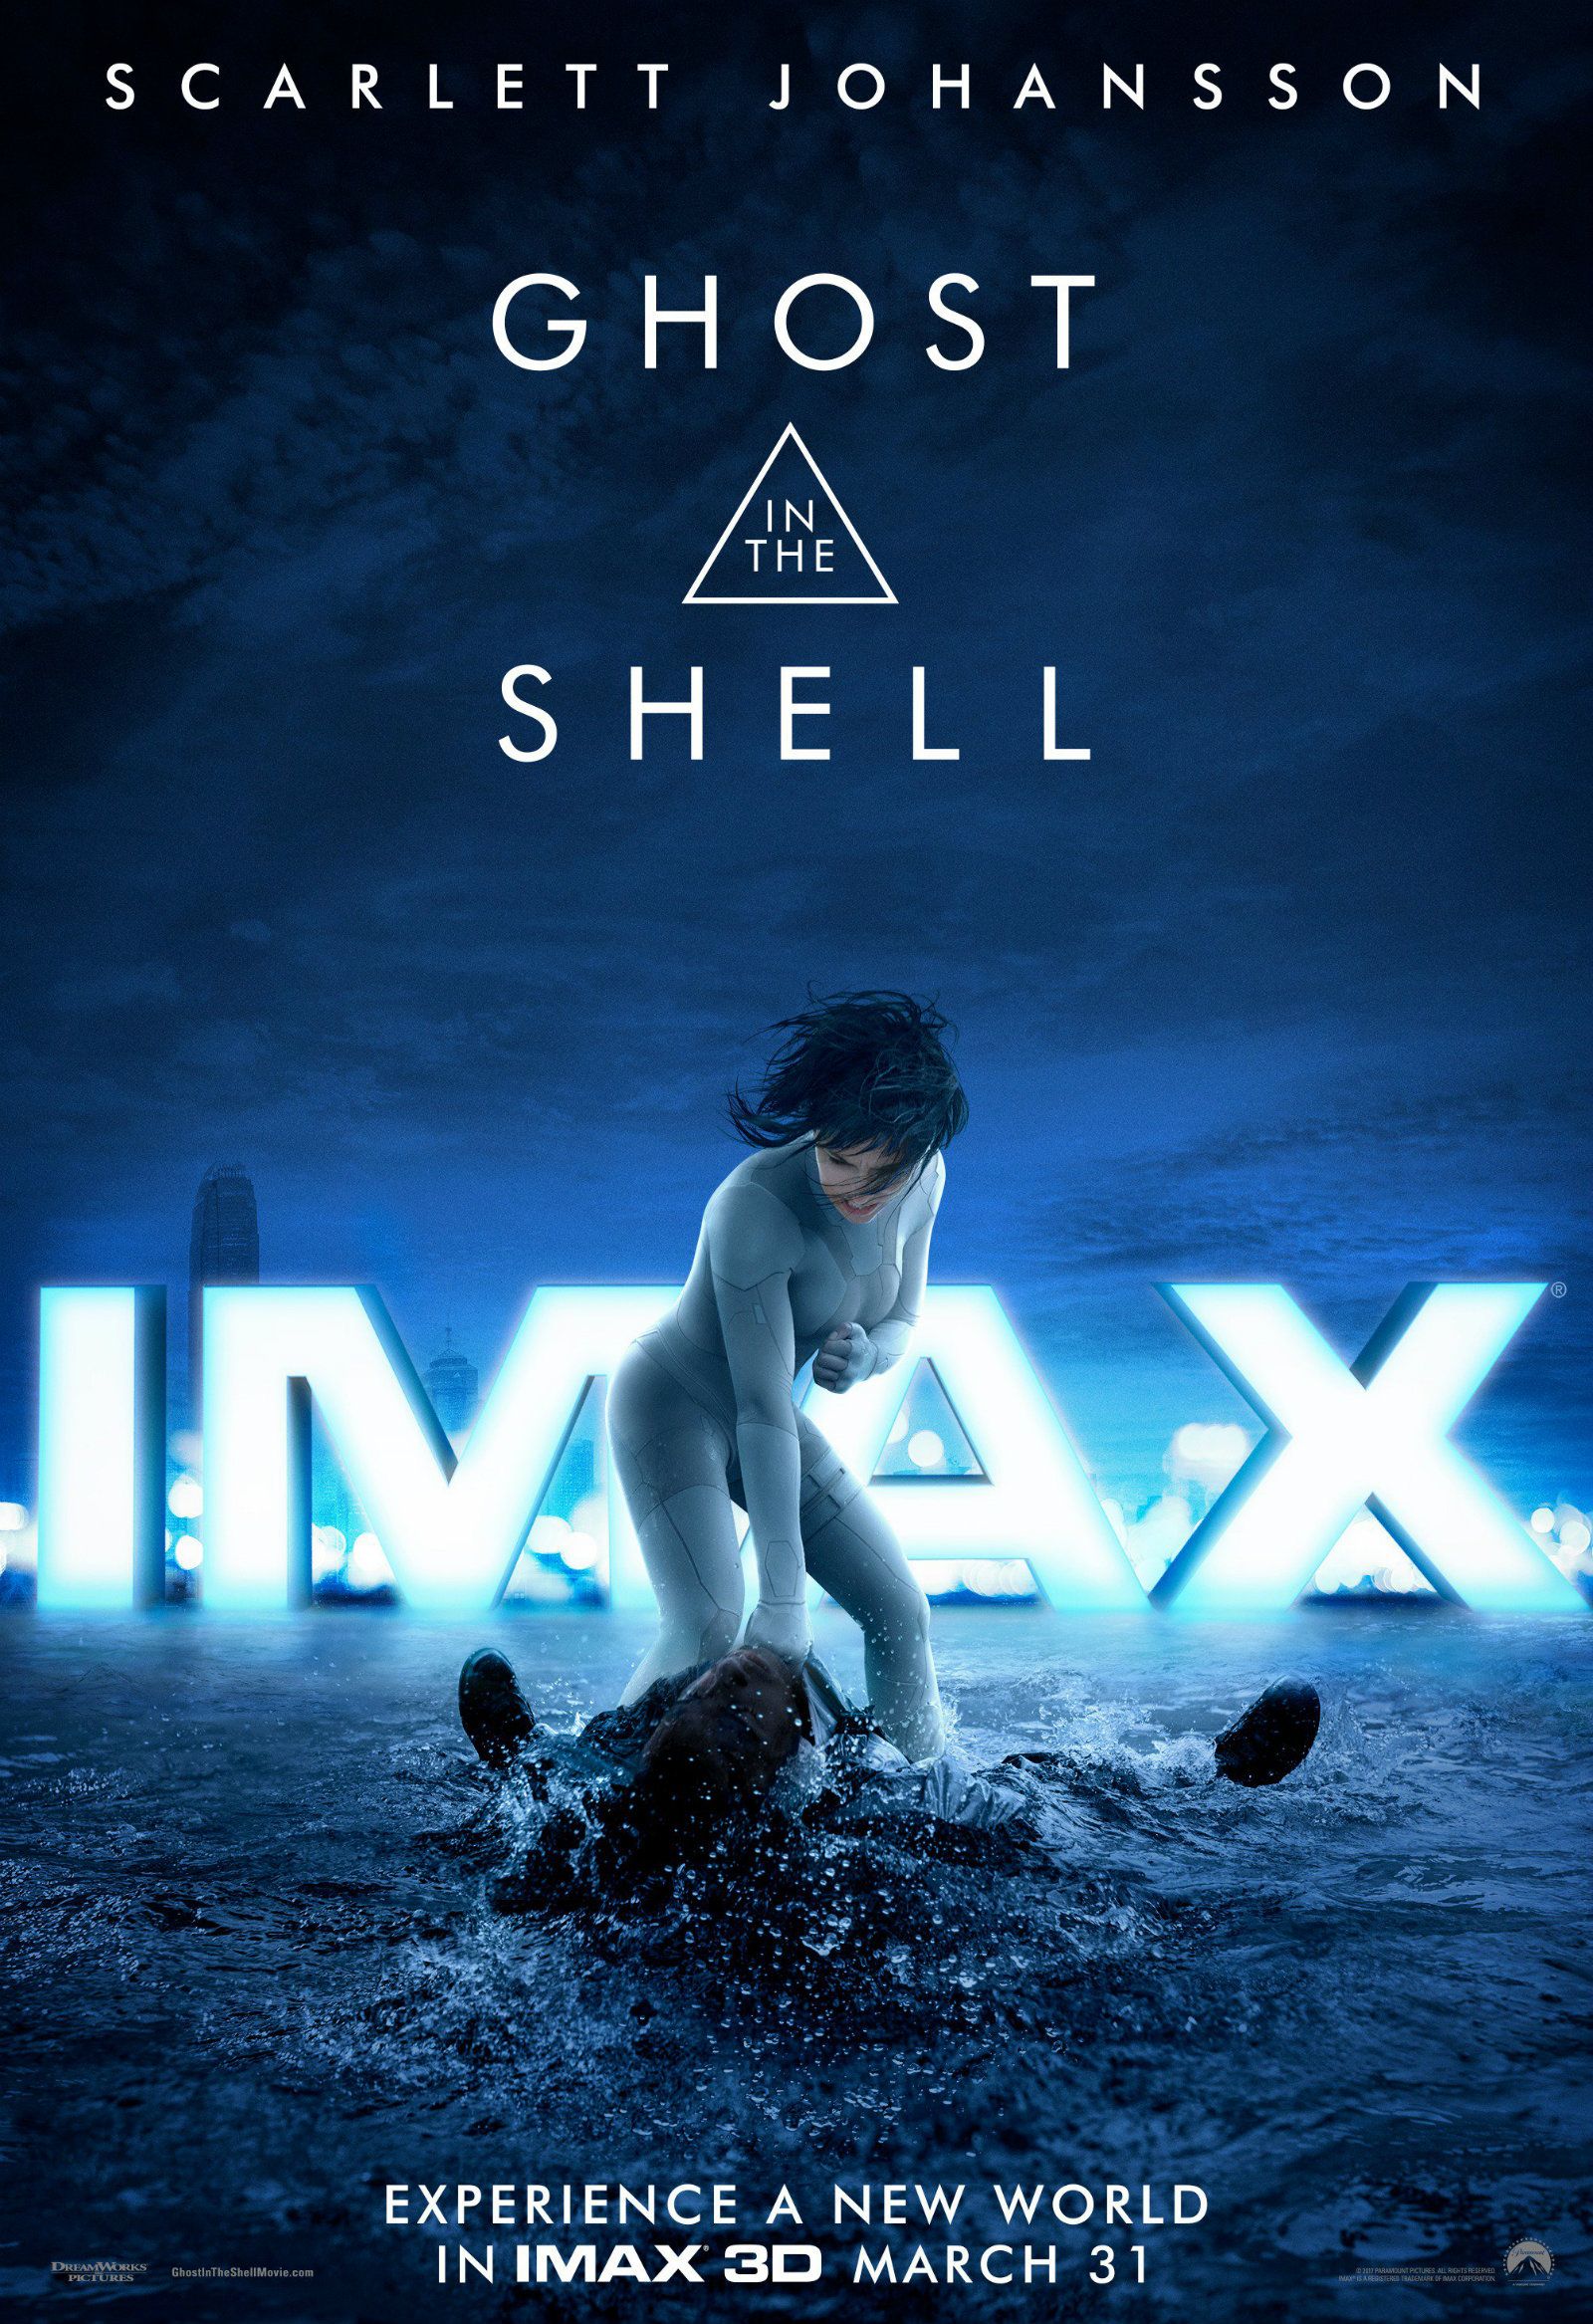 Ghost in the Shell IMAX Poster